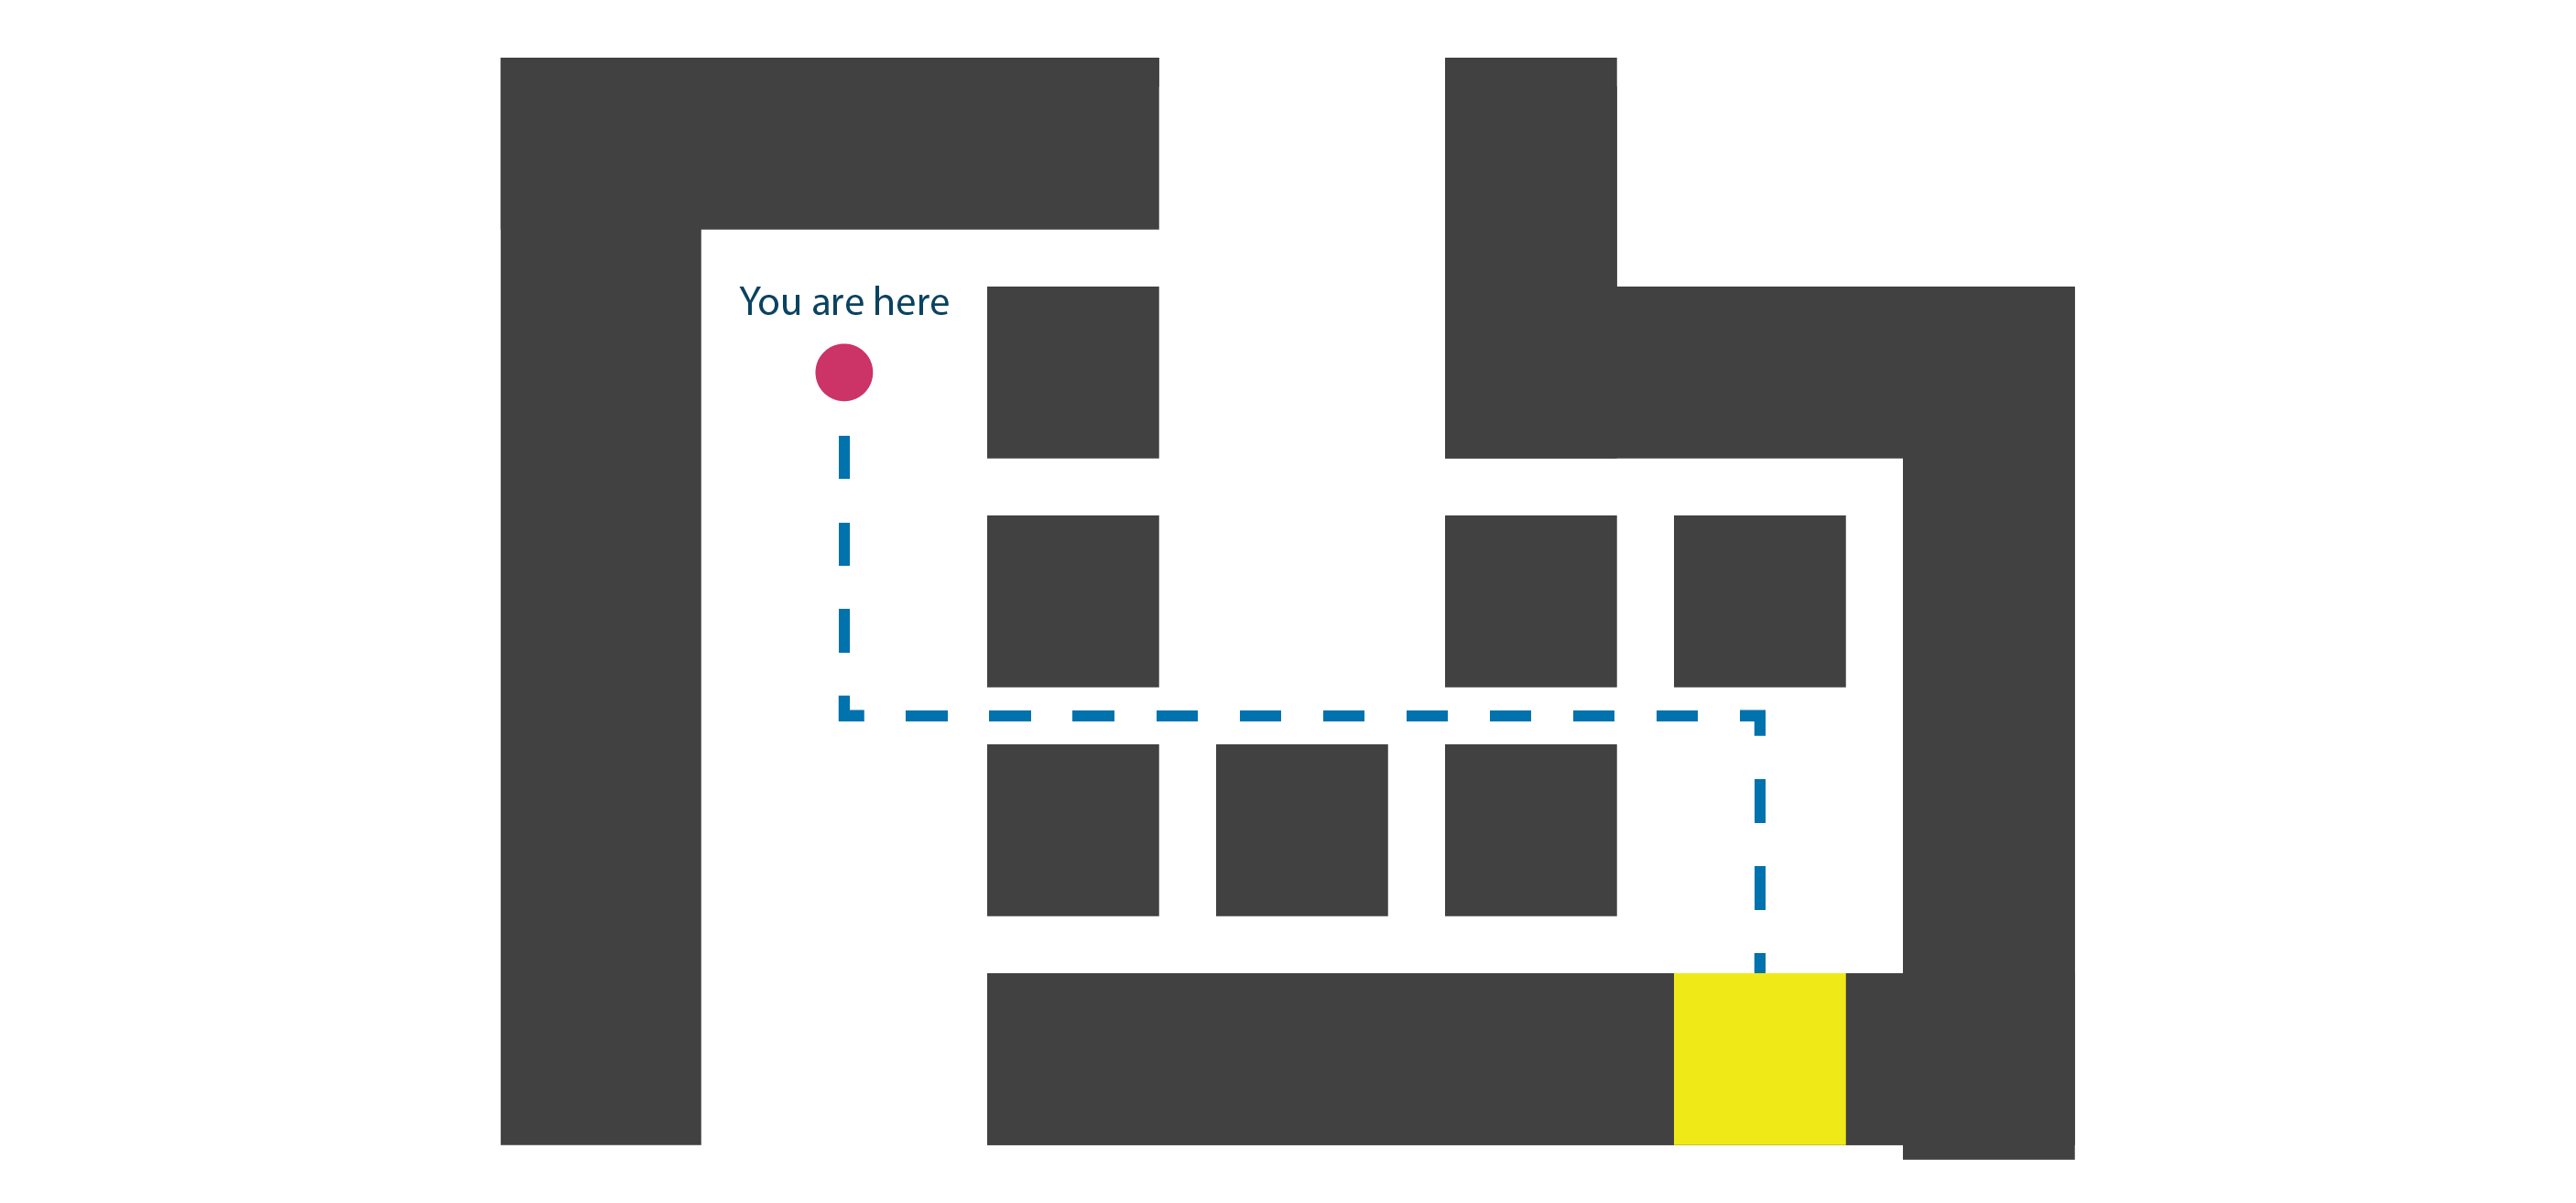 Illustration showing a map that clearly states where the user is within a system, in this case within a building or city